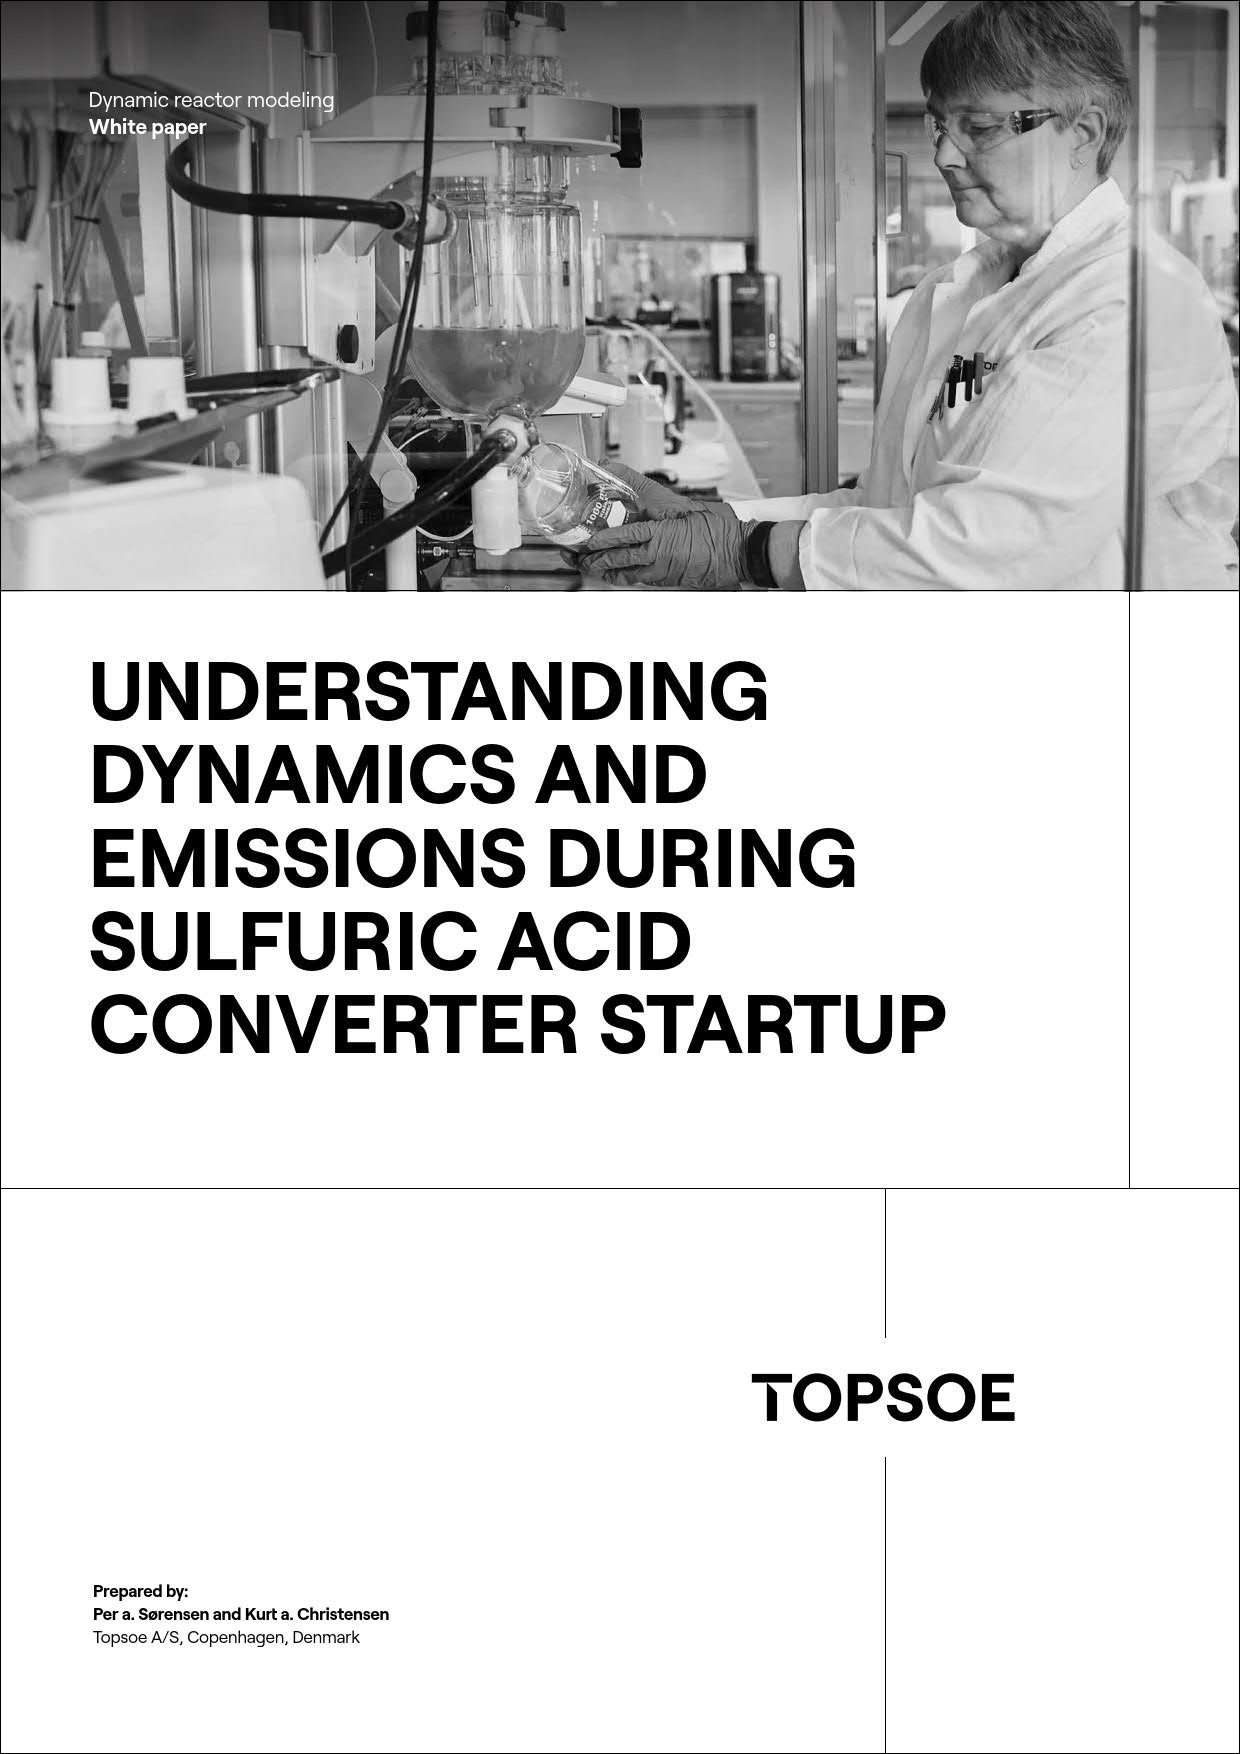 Understanding dynamics and emissions during sulfuric acid converter startup